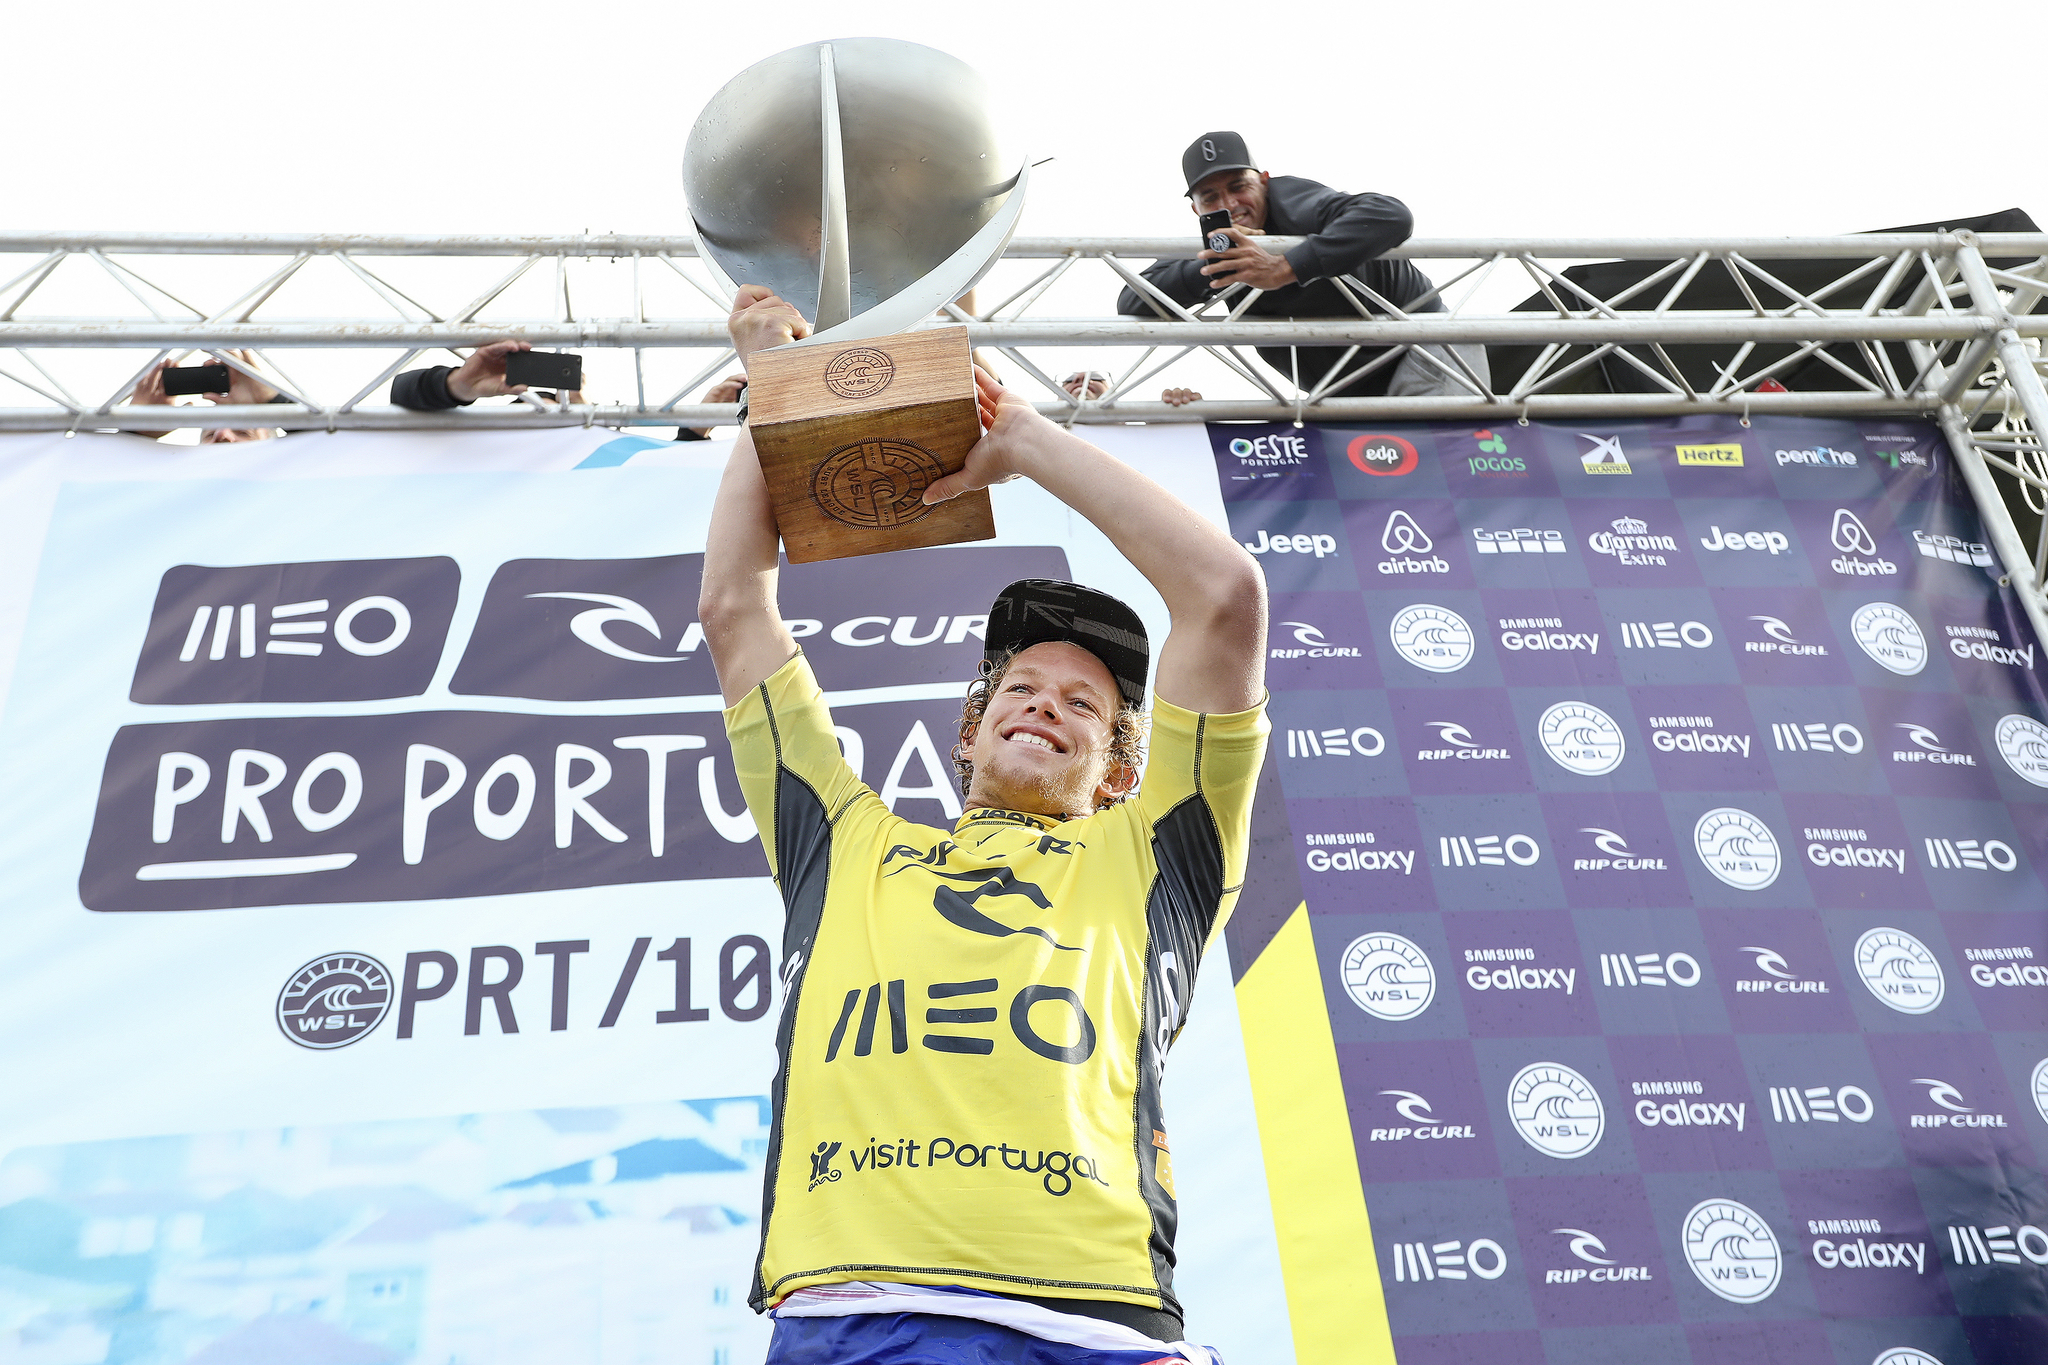 John John Florence is the 2016 World Champion and the Rip Curl Pro Portugal Winner. Photo: WSL